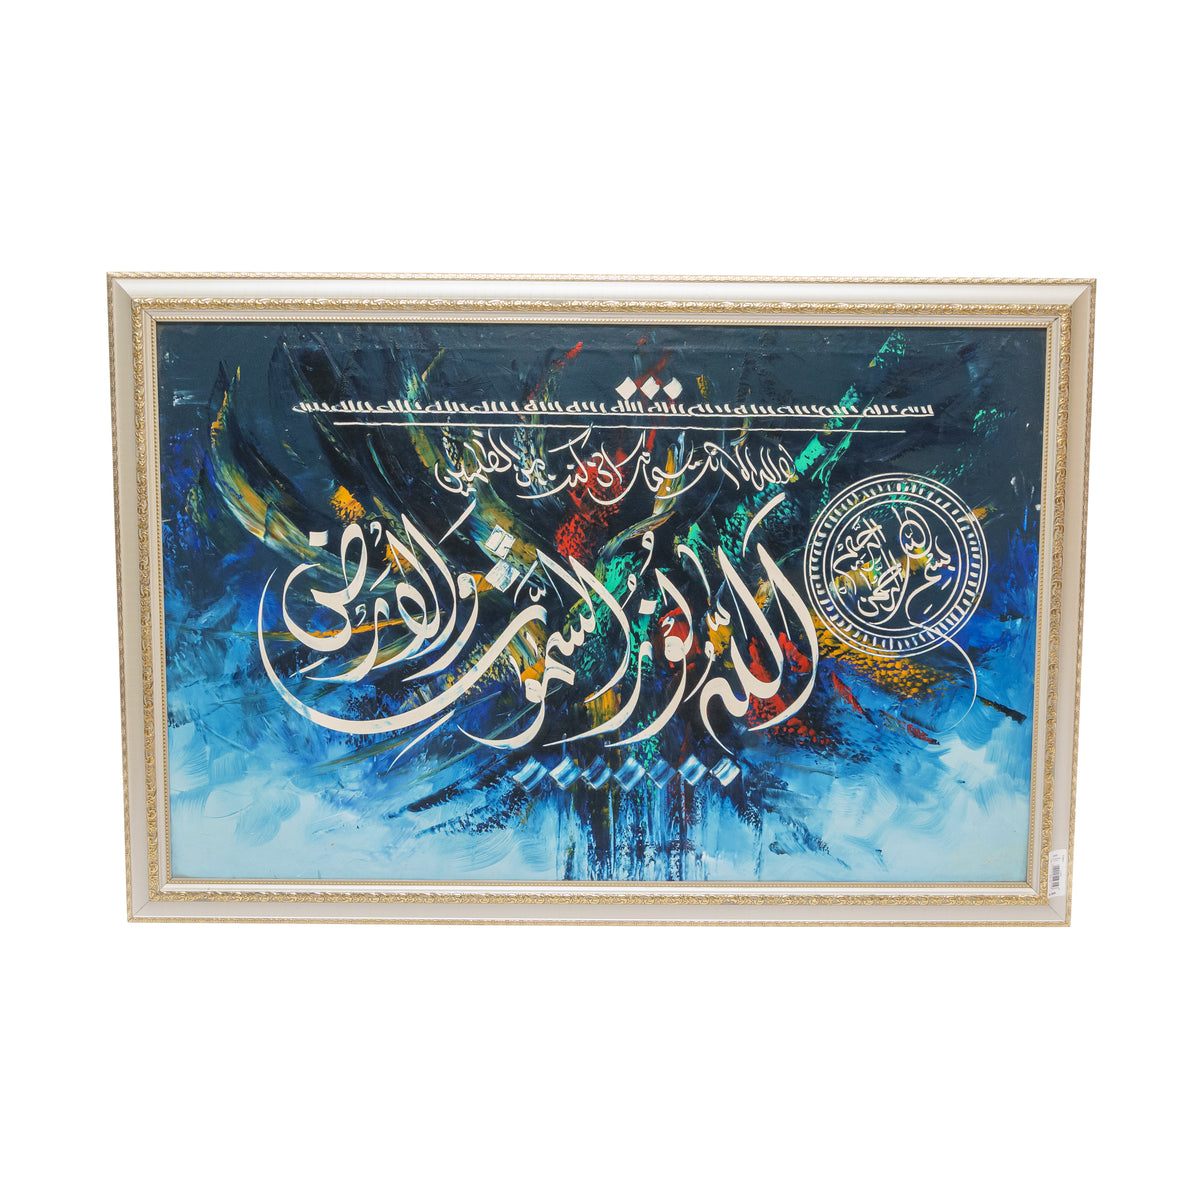 Unique Quranic Calligraphy Art: Acrylic Frame of High Quality